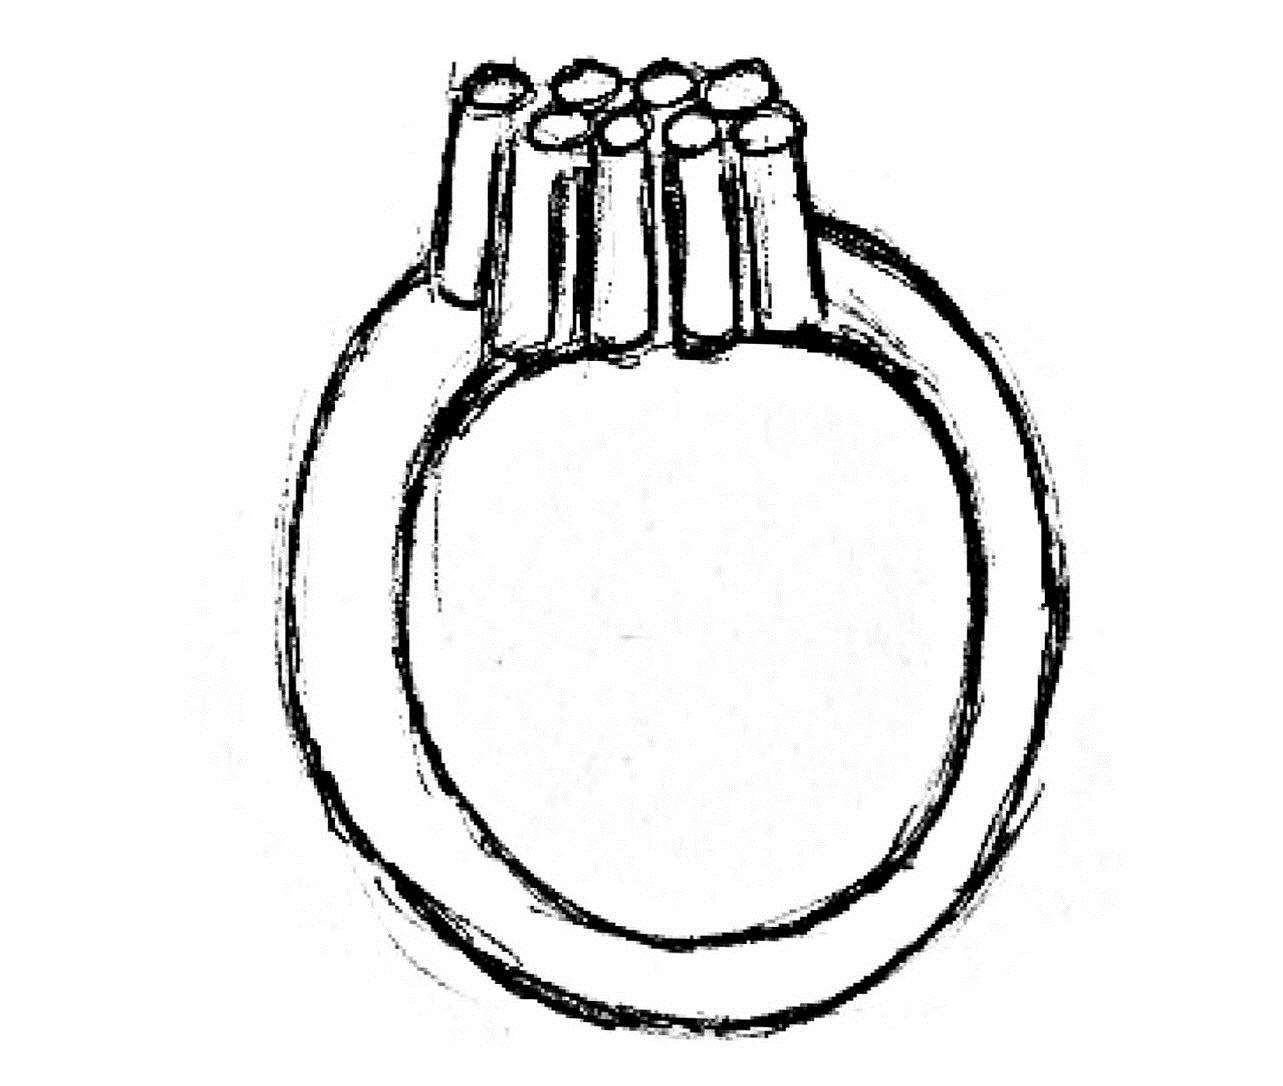 A sketch of the lost ring (6498616)